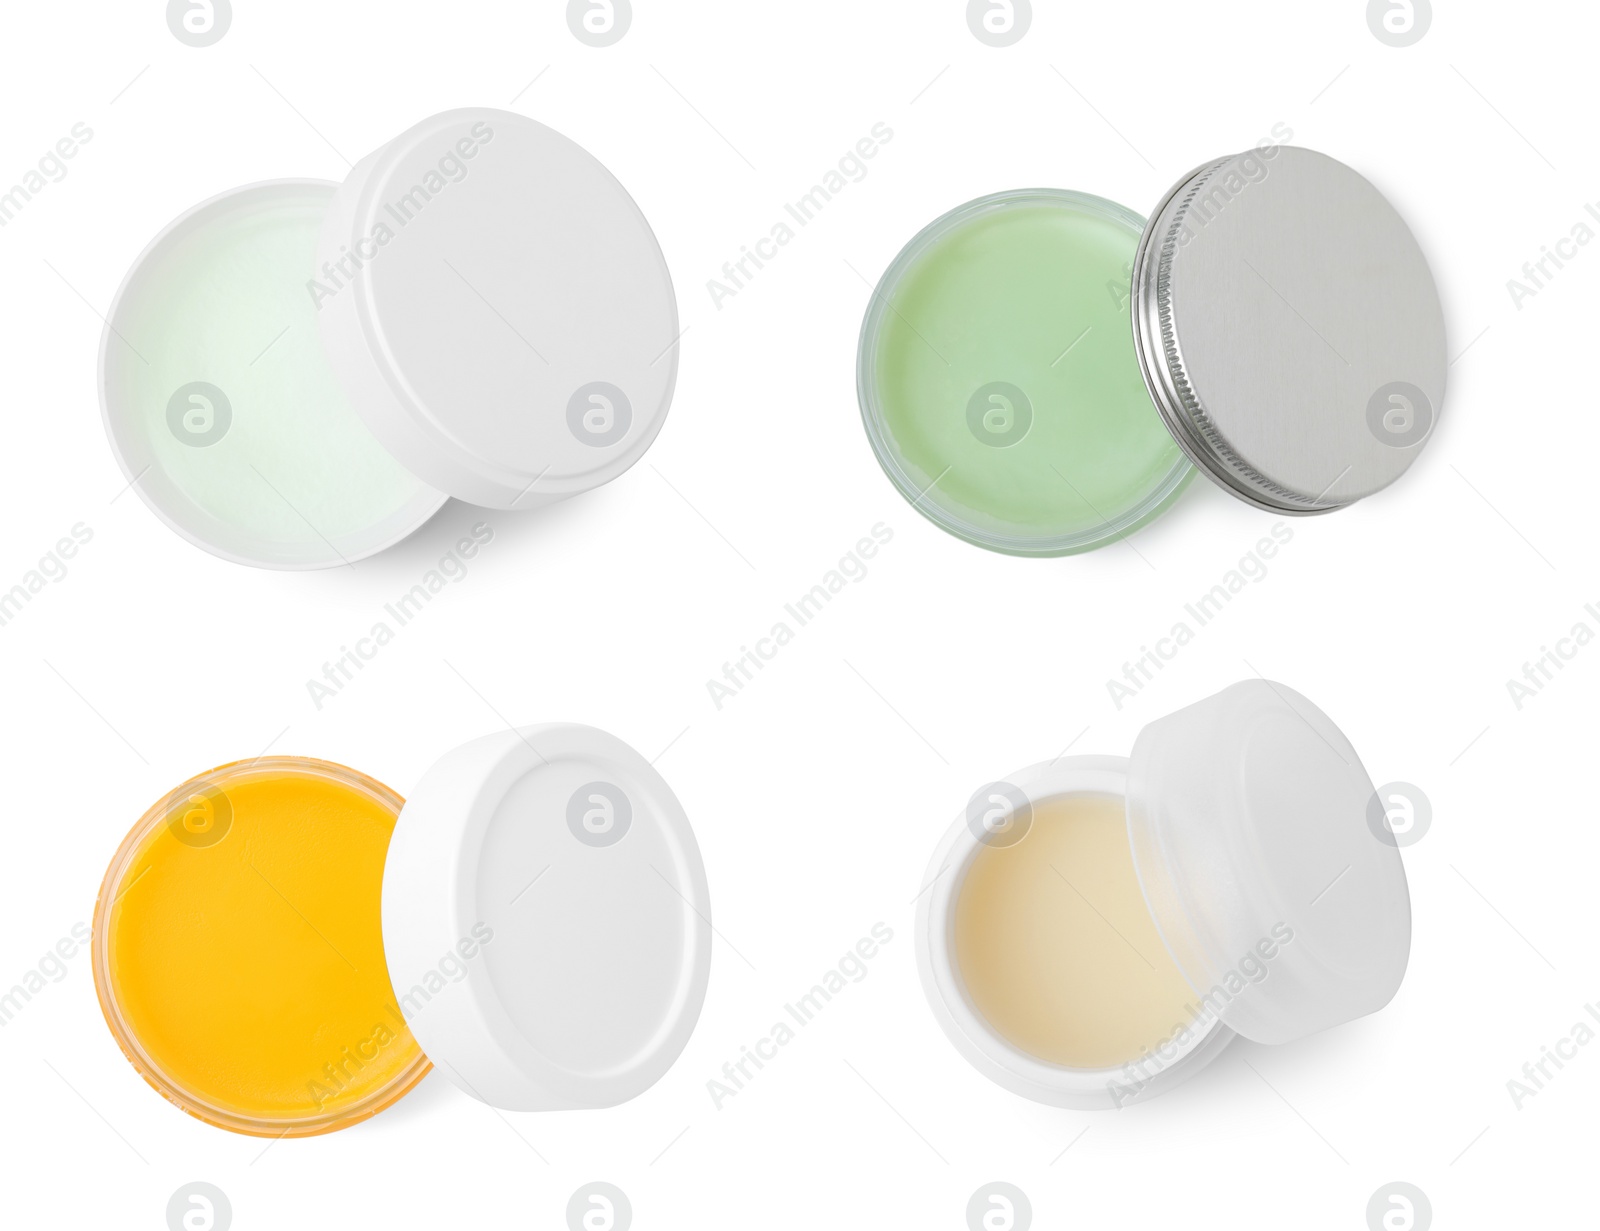 Image of Collage with different petroleum jellies in jars on white background, top view. Cosmetic petrolatum